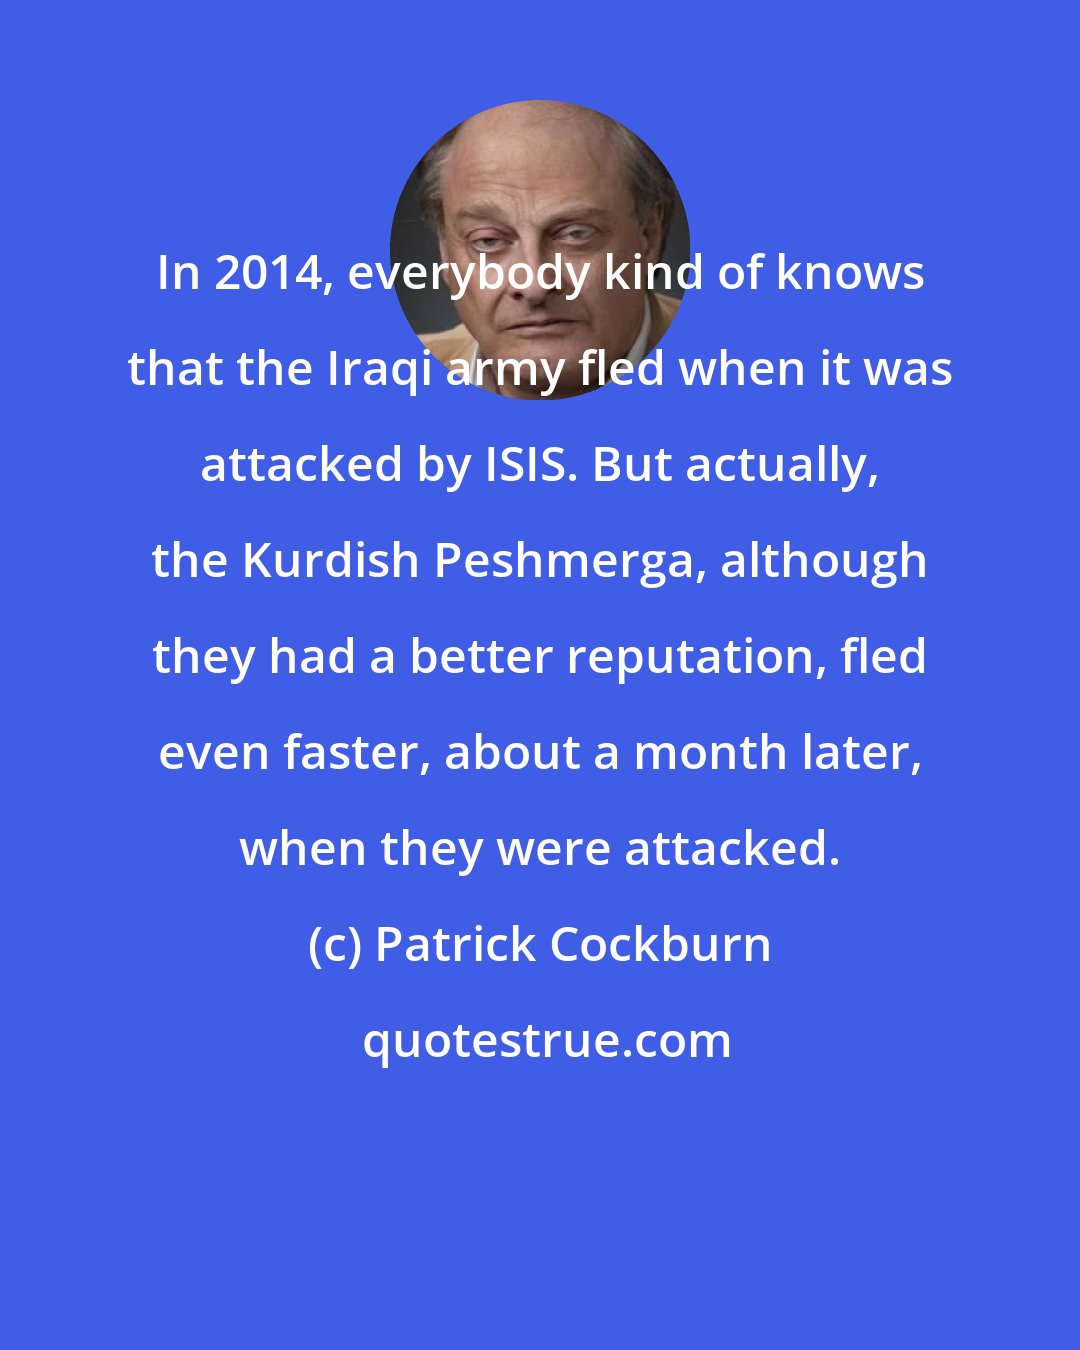 Patrick Cockburn: In 2014, everybody kind of knows that the Iraqi army fled when it was attacked by ISIS. But actually, the Kurdish Peshmerga, although they had a better reputation, fled even faster, about a month later, when they were attacked.